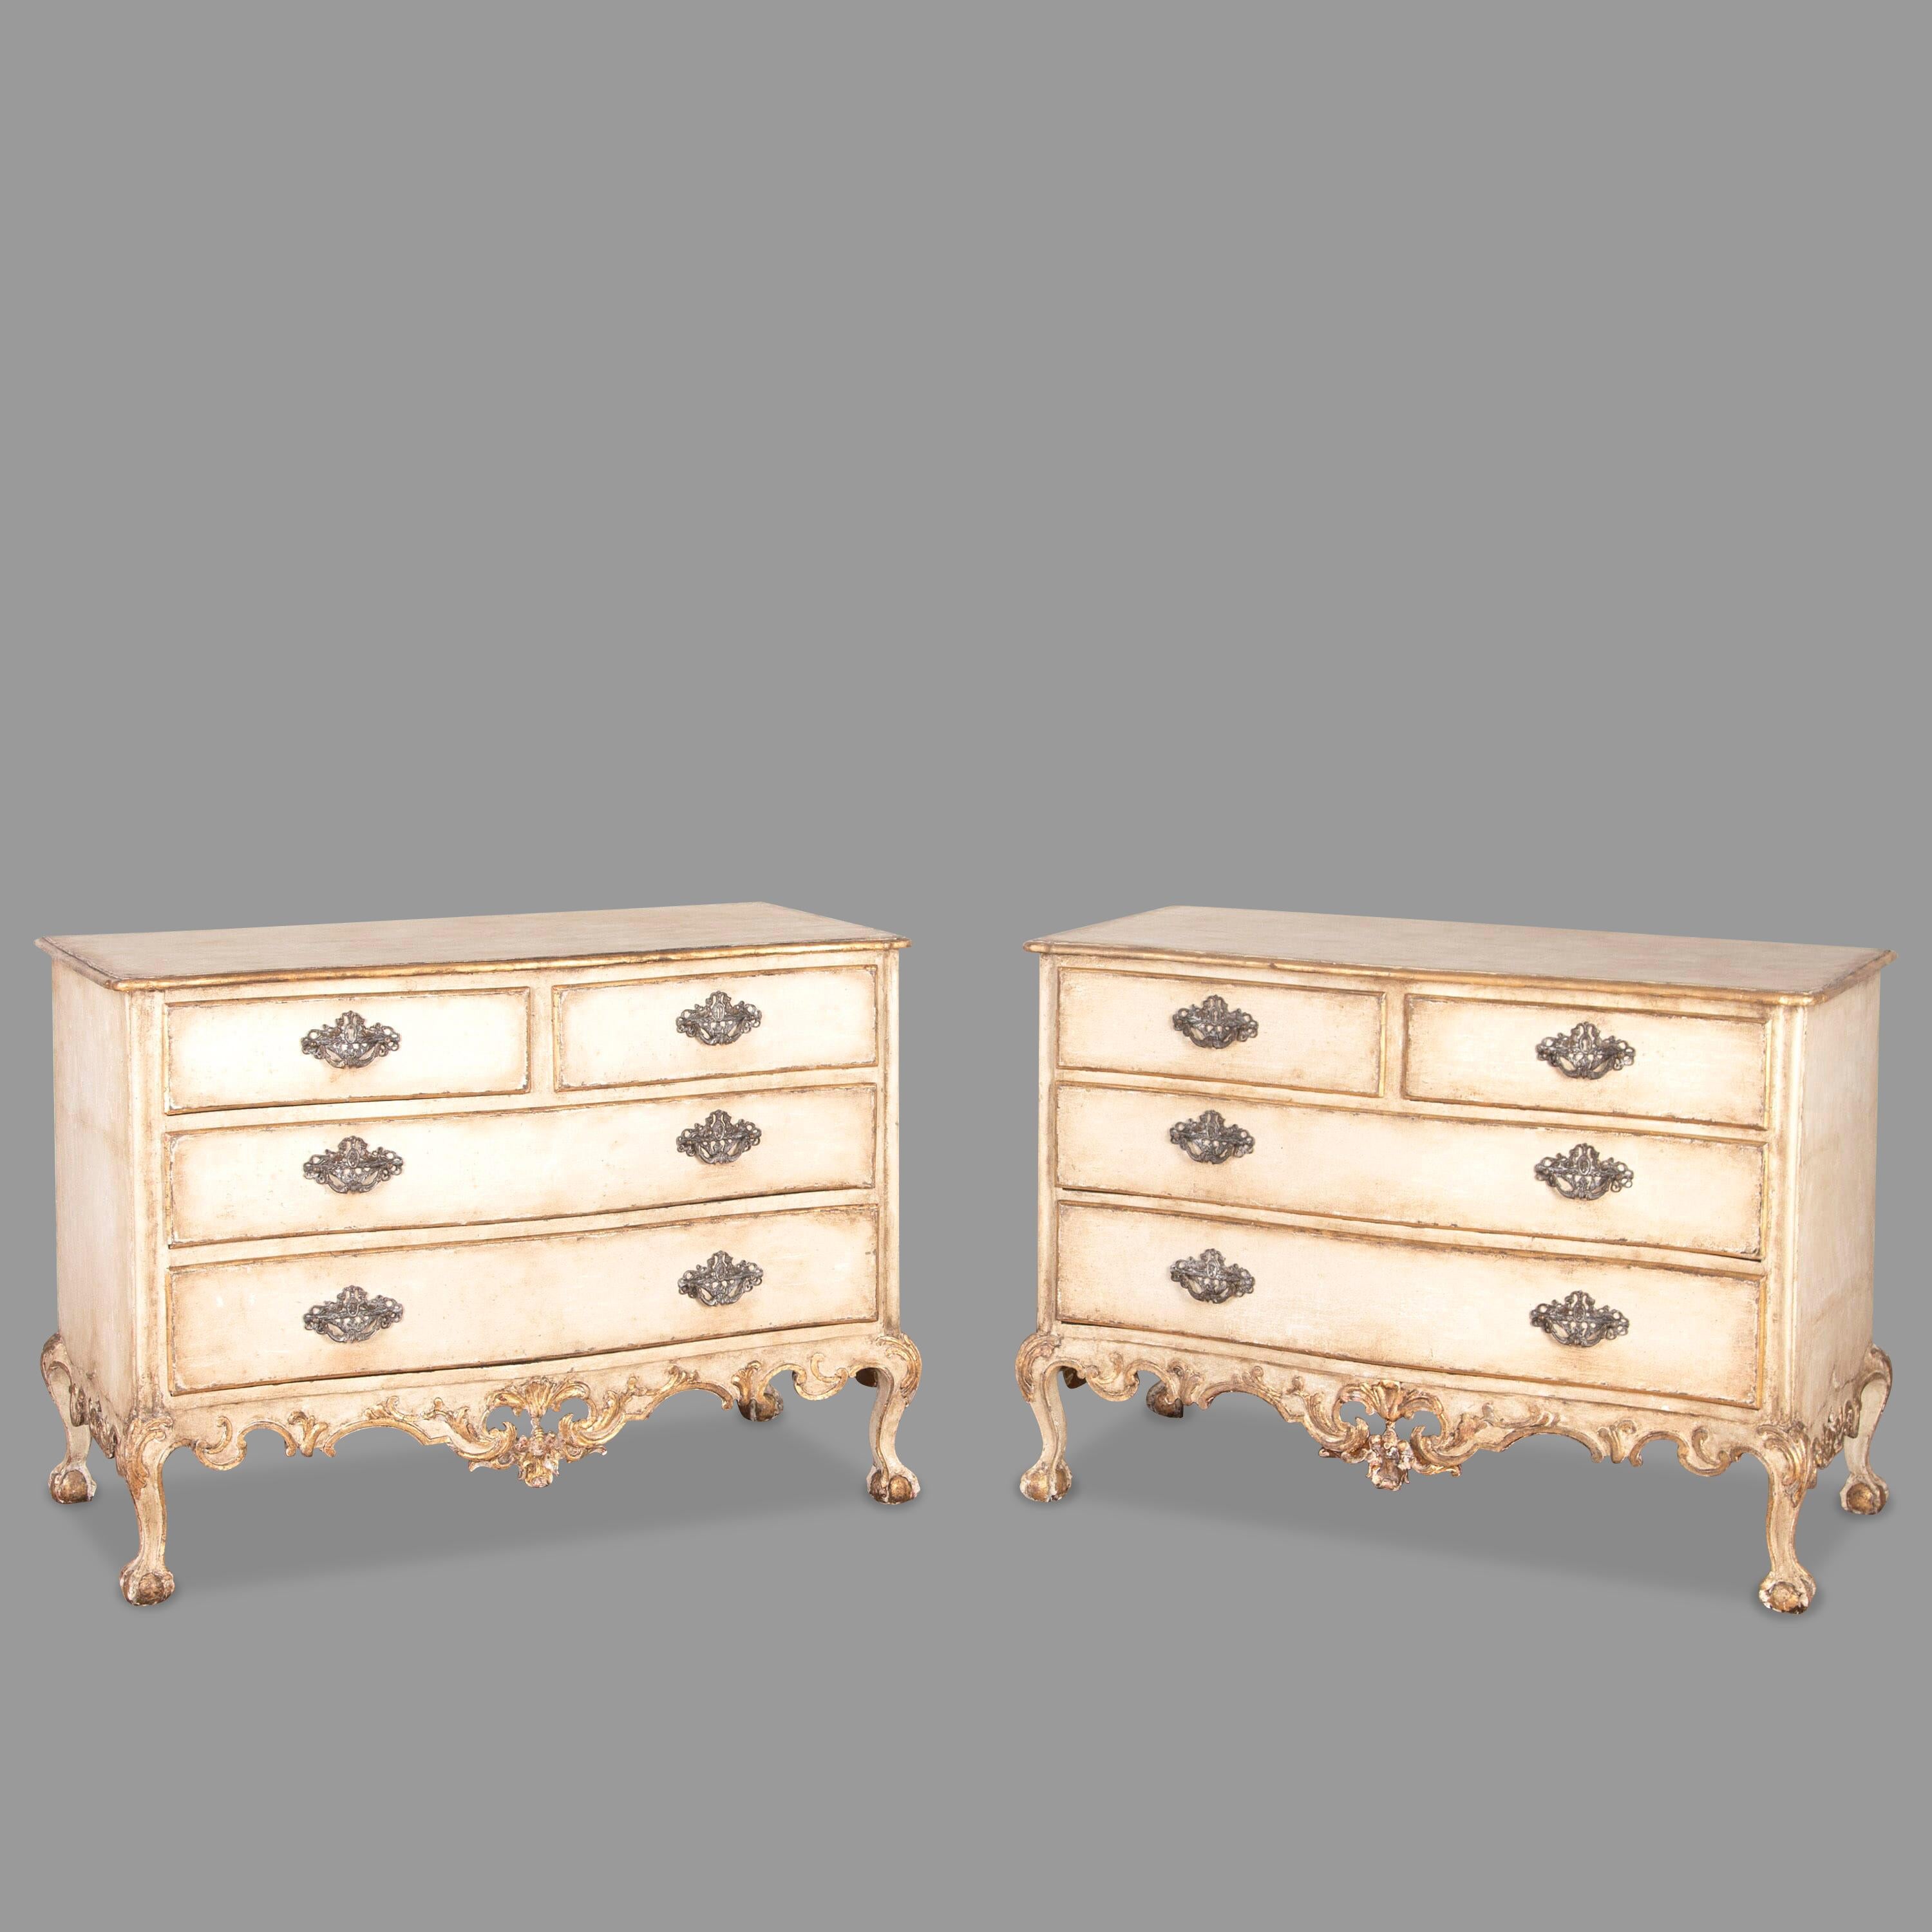 Rococo pair of C18th Portuguese serpentine decorated commodes  For Sale